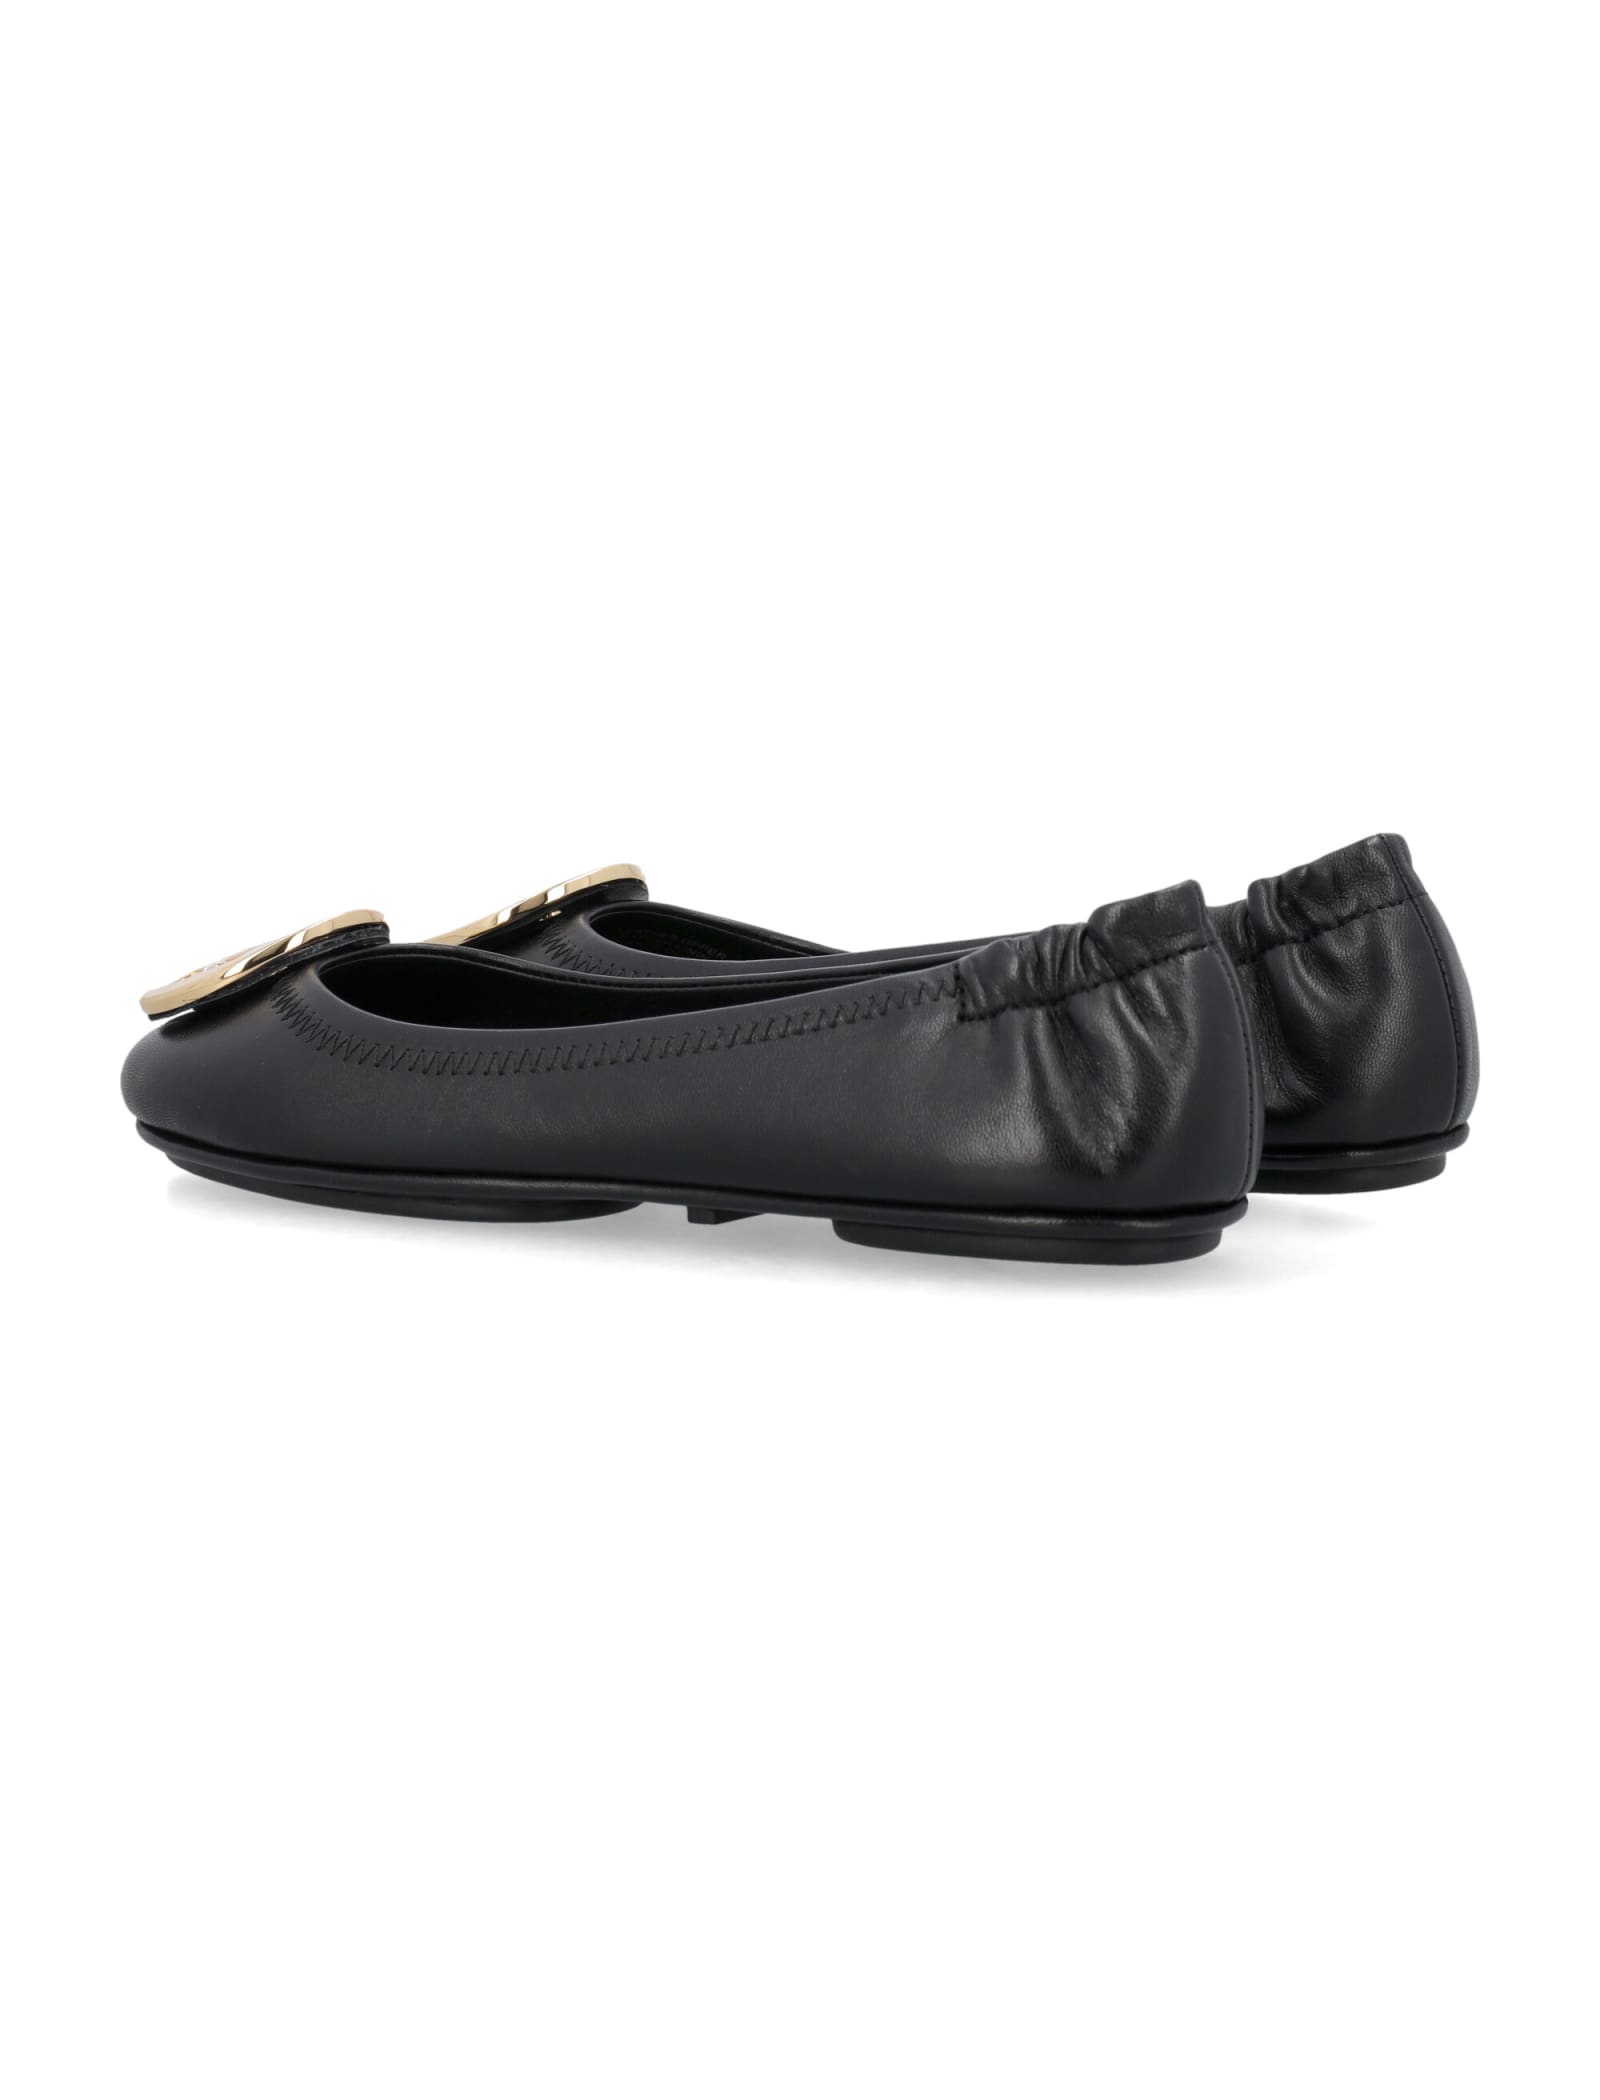 Shop Tory Burch Minnie Travel Ballet In Perfect Black / Gold